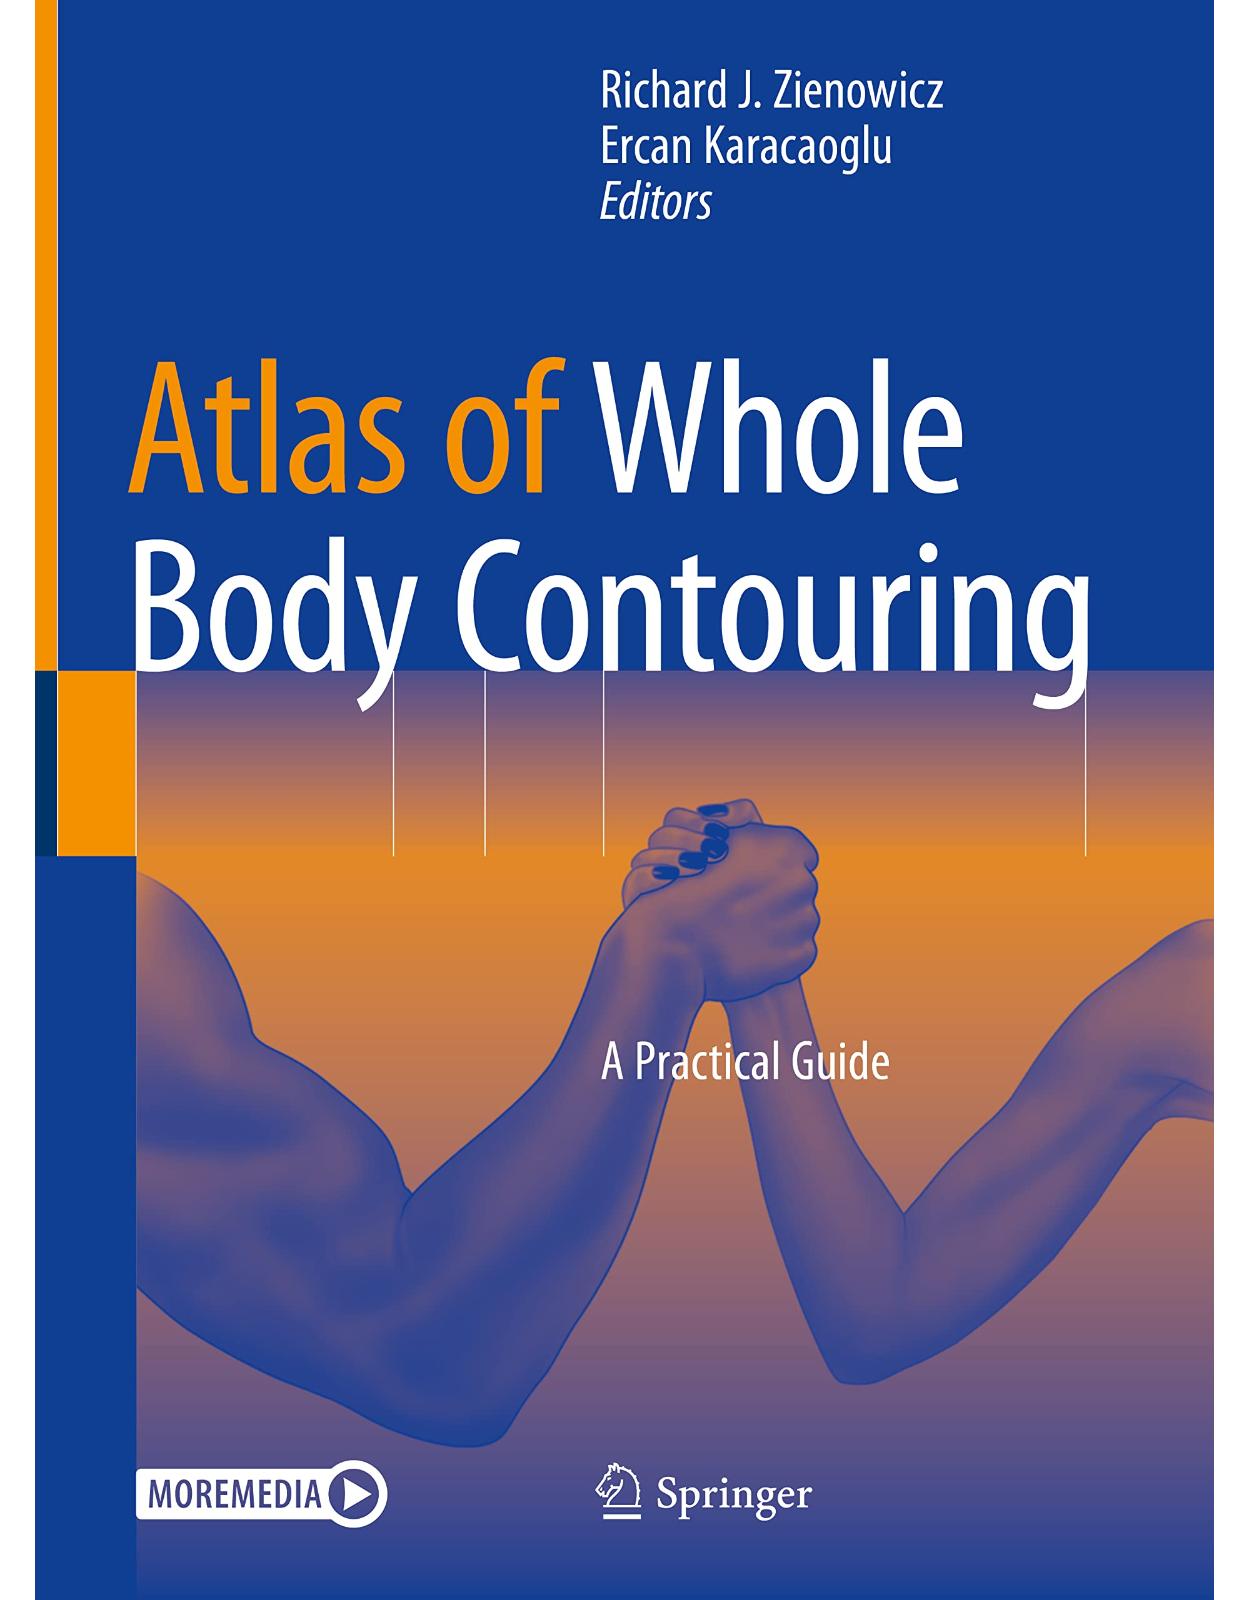 Atlas of Whole Body Contouring: A Practical Guide